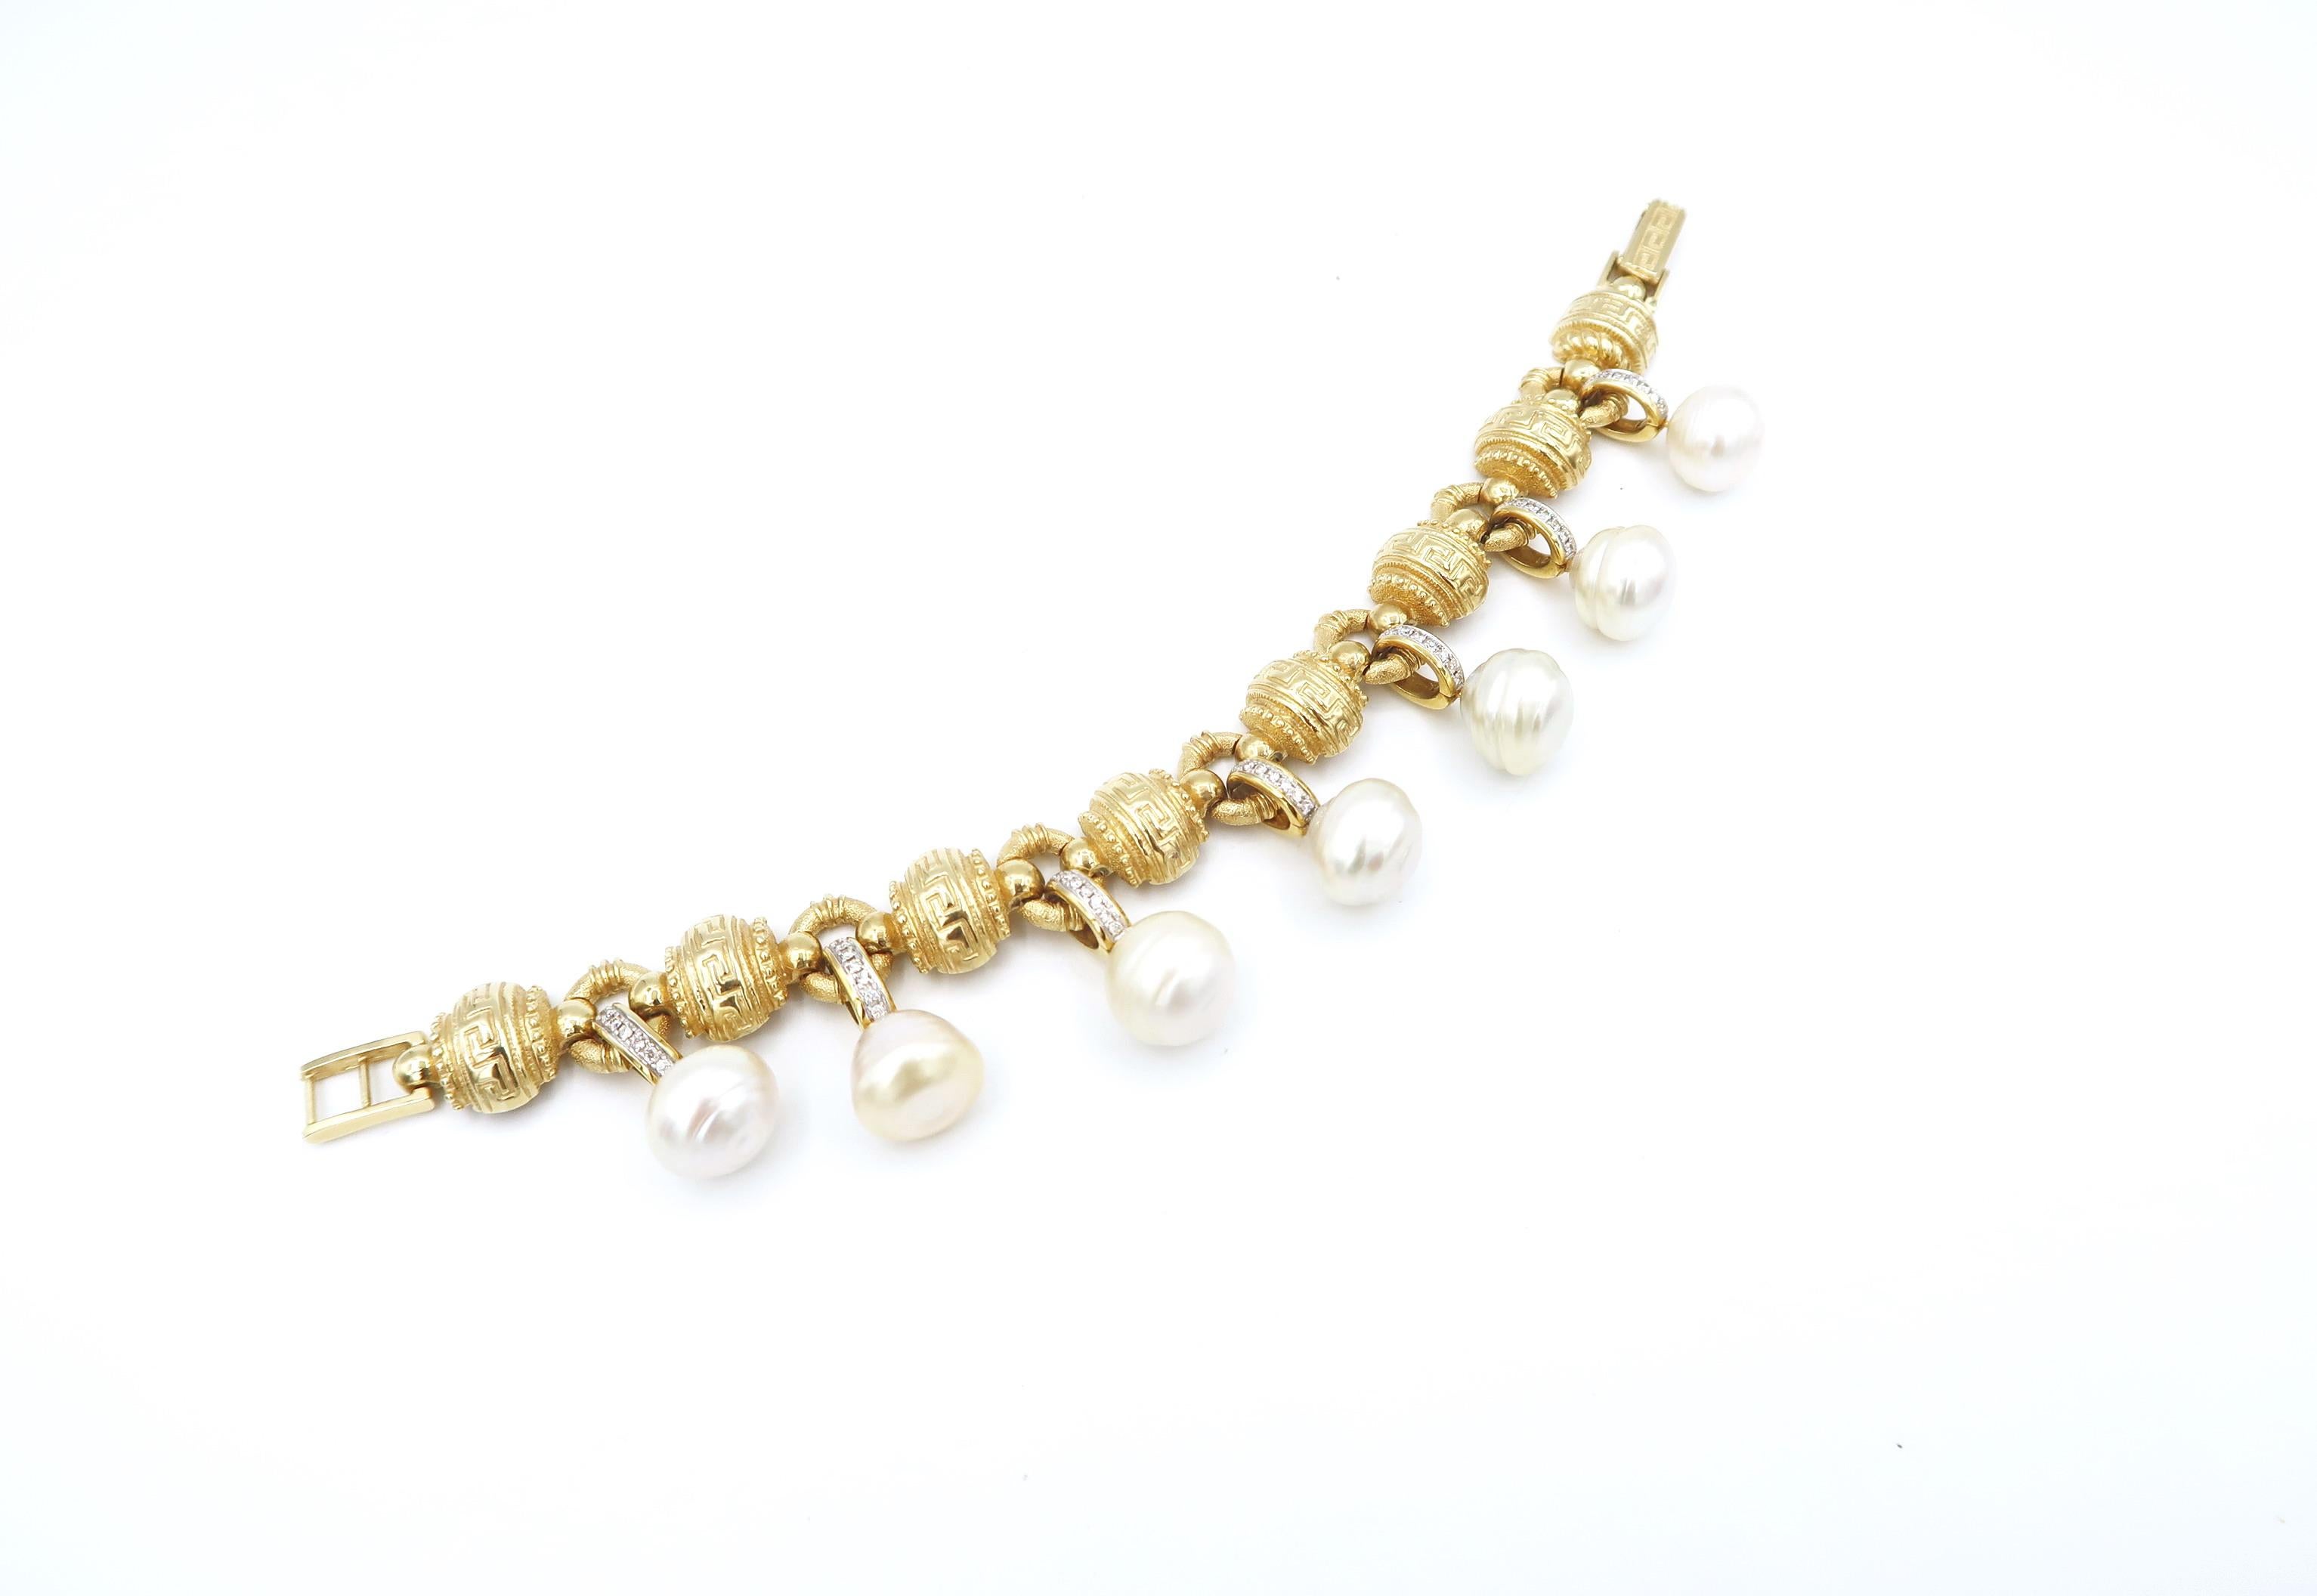 Meander Pattern/ Greek Fret/ Key Bracelet in 18K Gold with Detachable Diamond and South Sea Pearl Charm

Length: 7.5